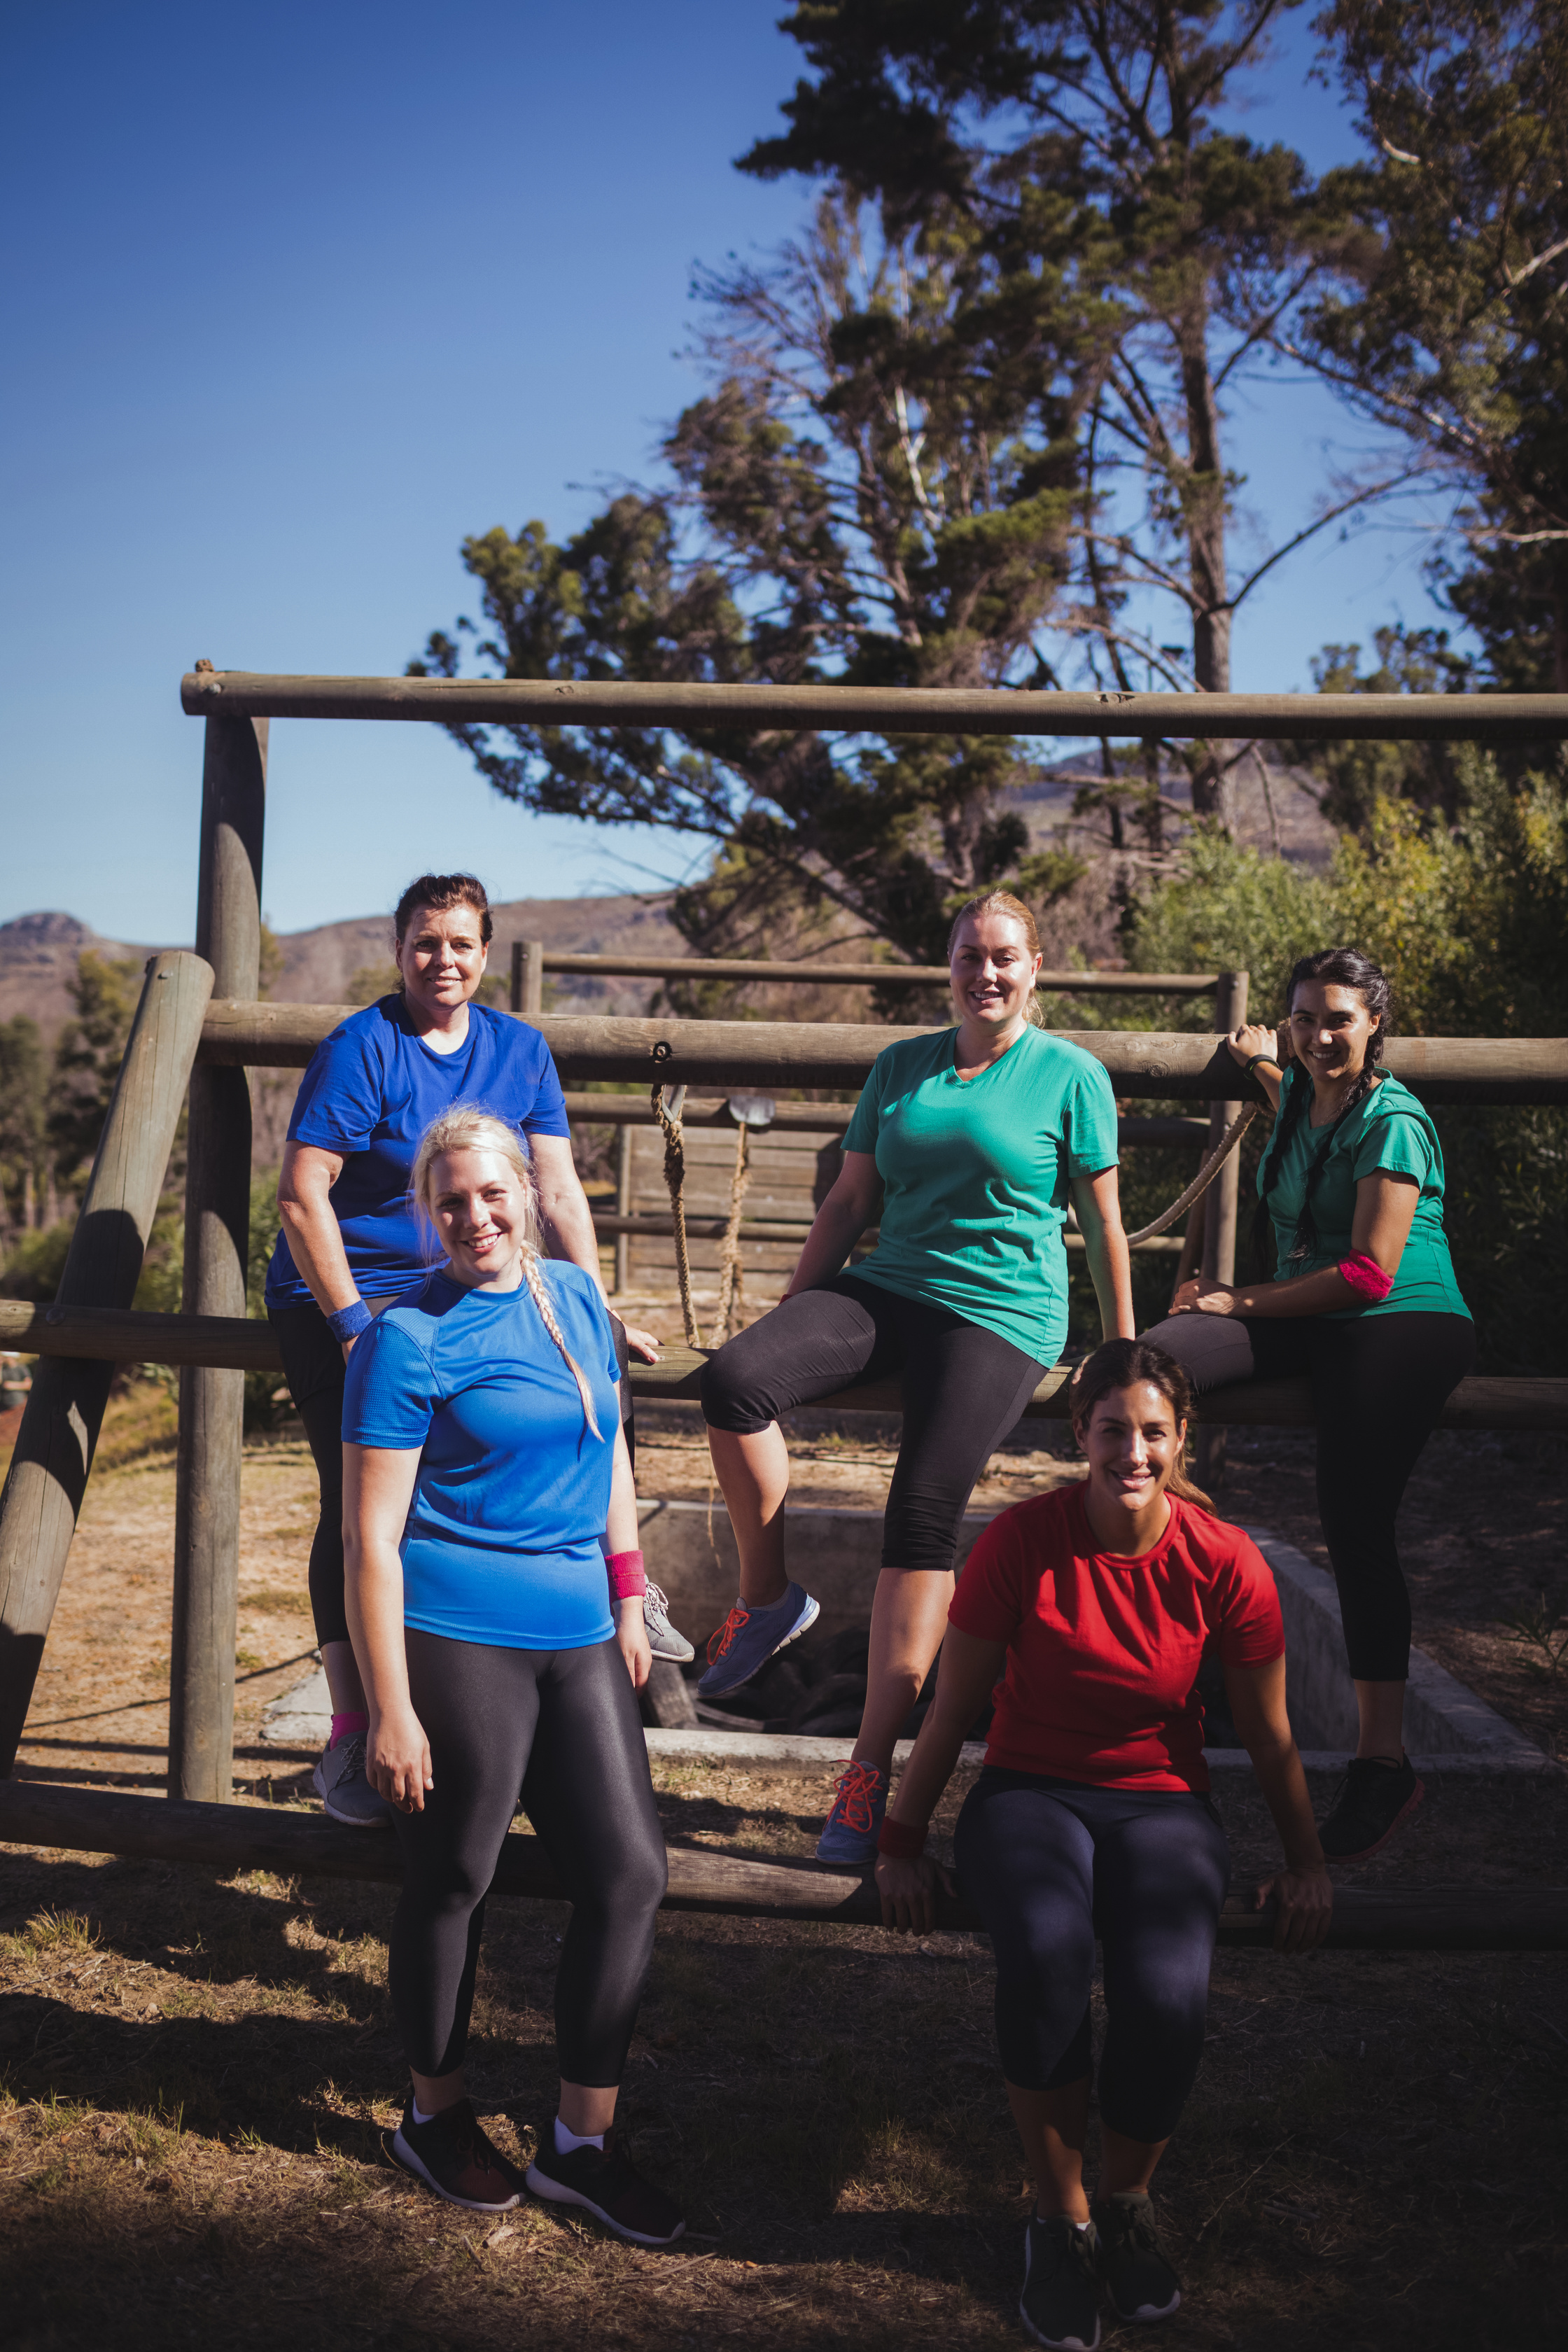 Group of fit women relaxing together in the boot camp